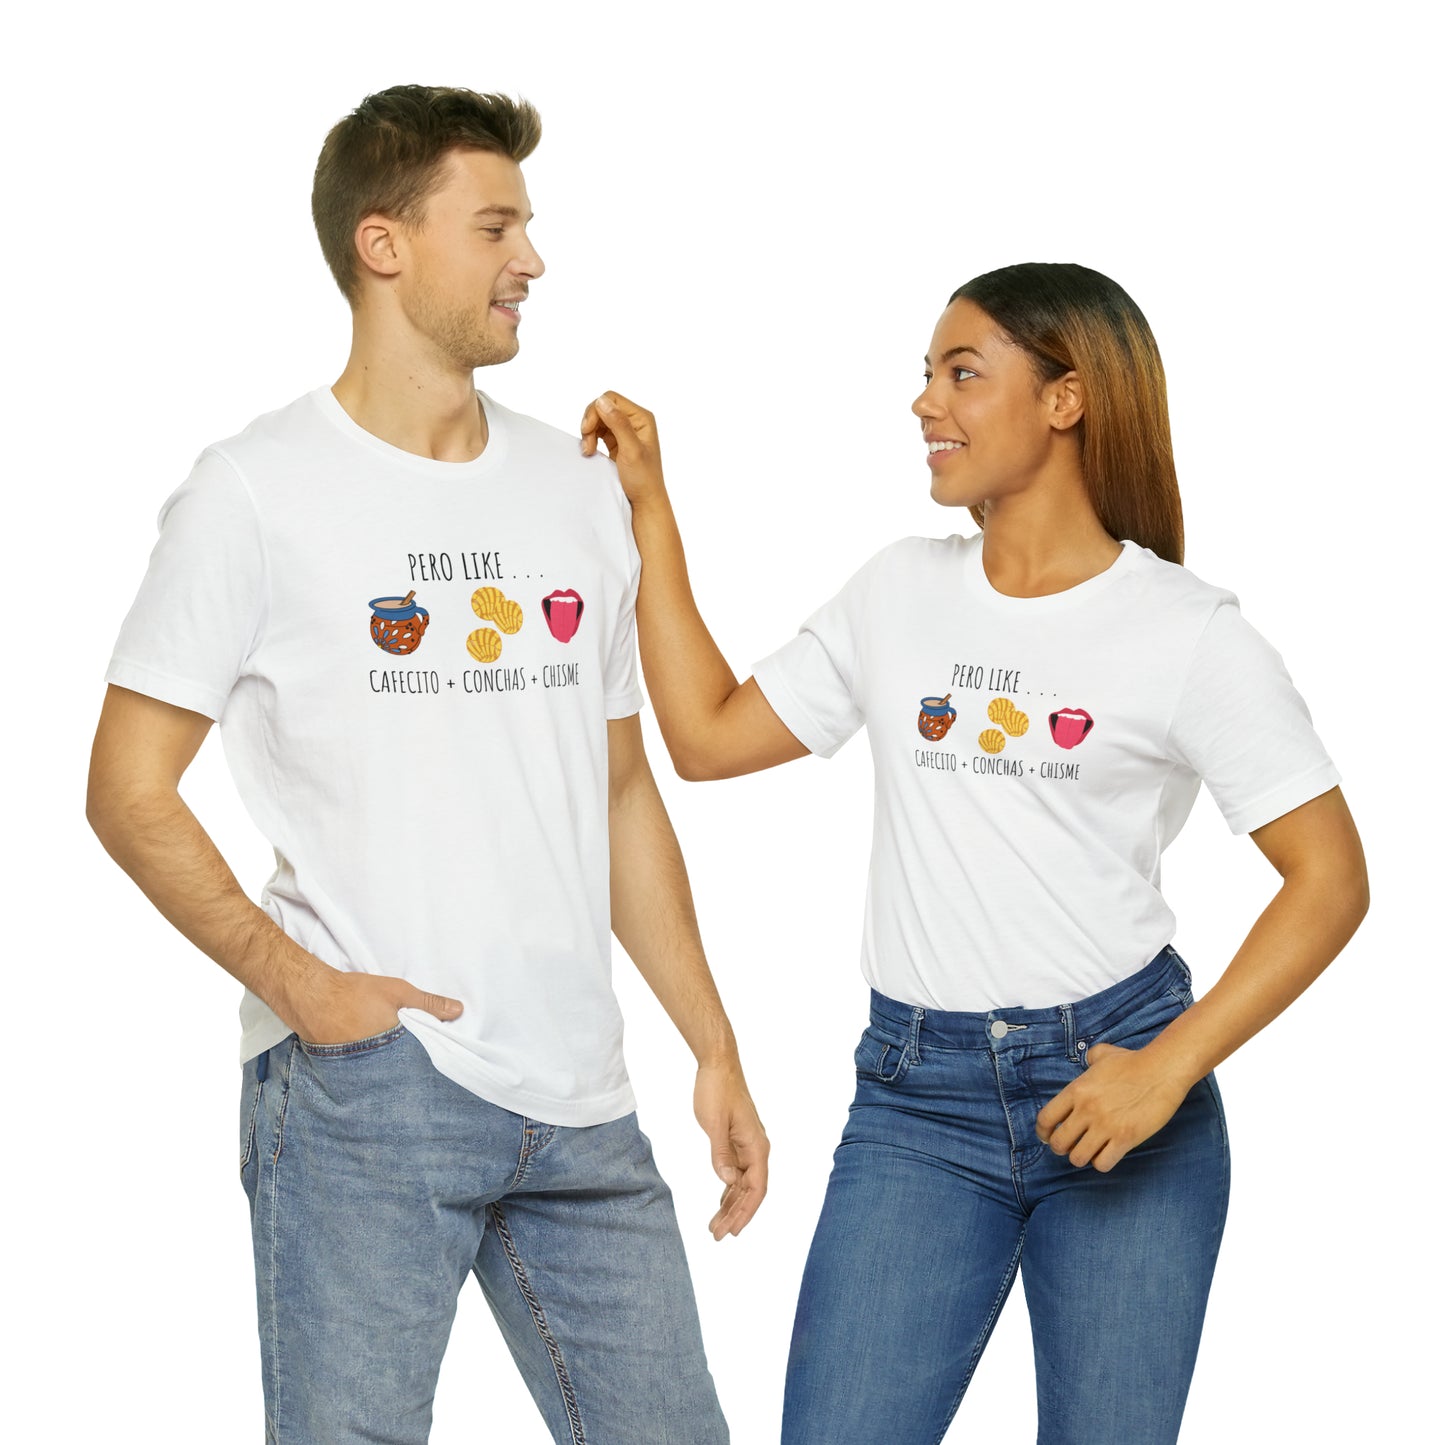 Cafecito, Conchas, & Chisme | Unisex Jersey Short Sleeve Tee